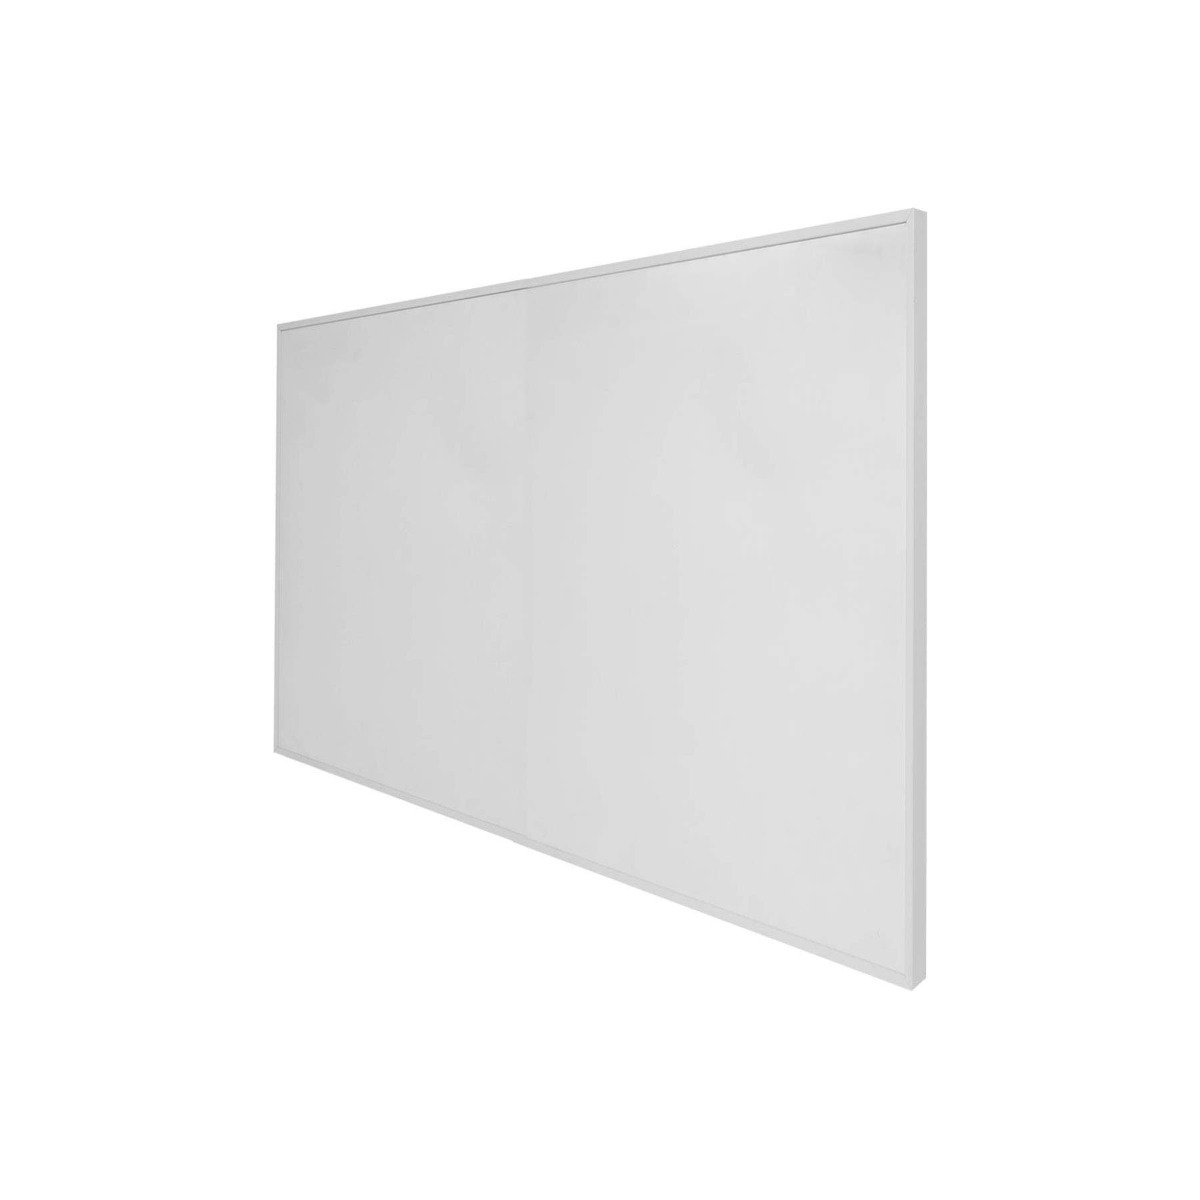 Ecostrad Accent iQ WiFi Controlled Infrared Wall Panel - 580w (905 x 605mm)